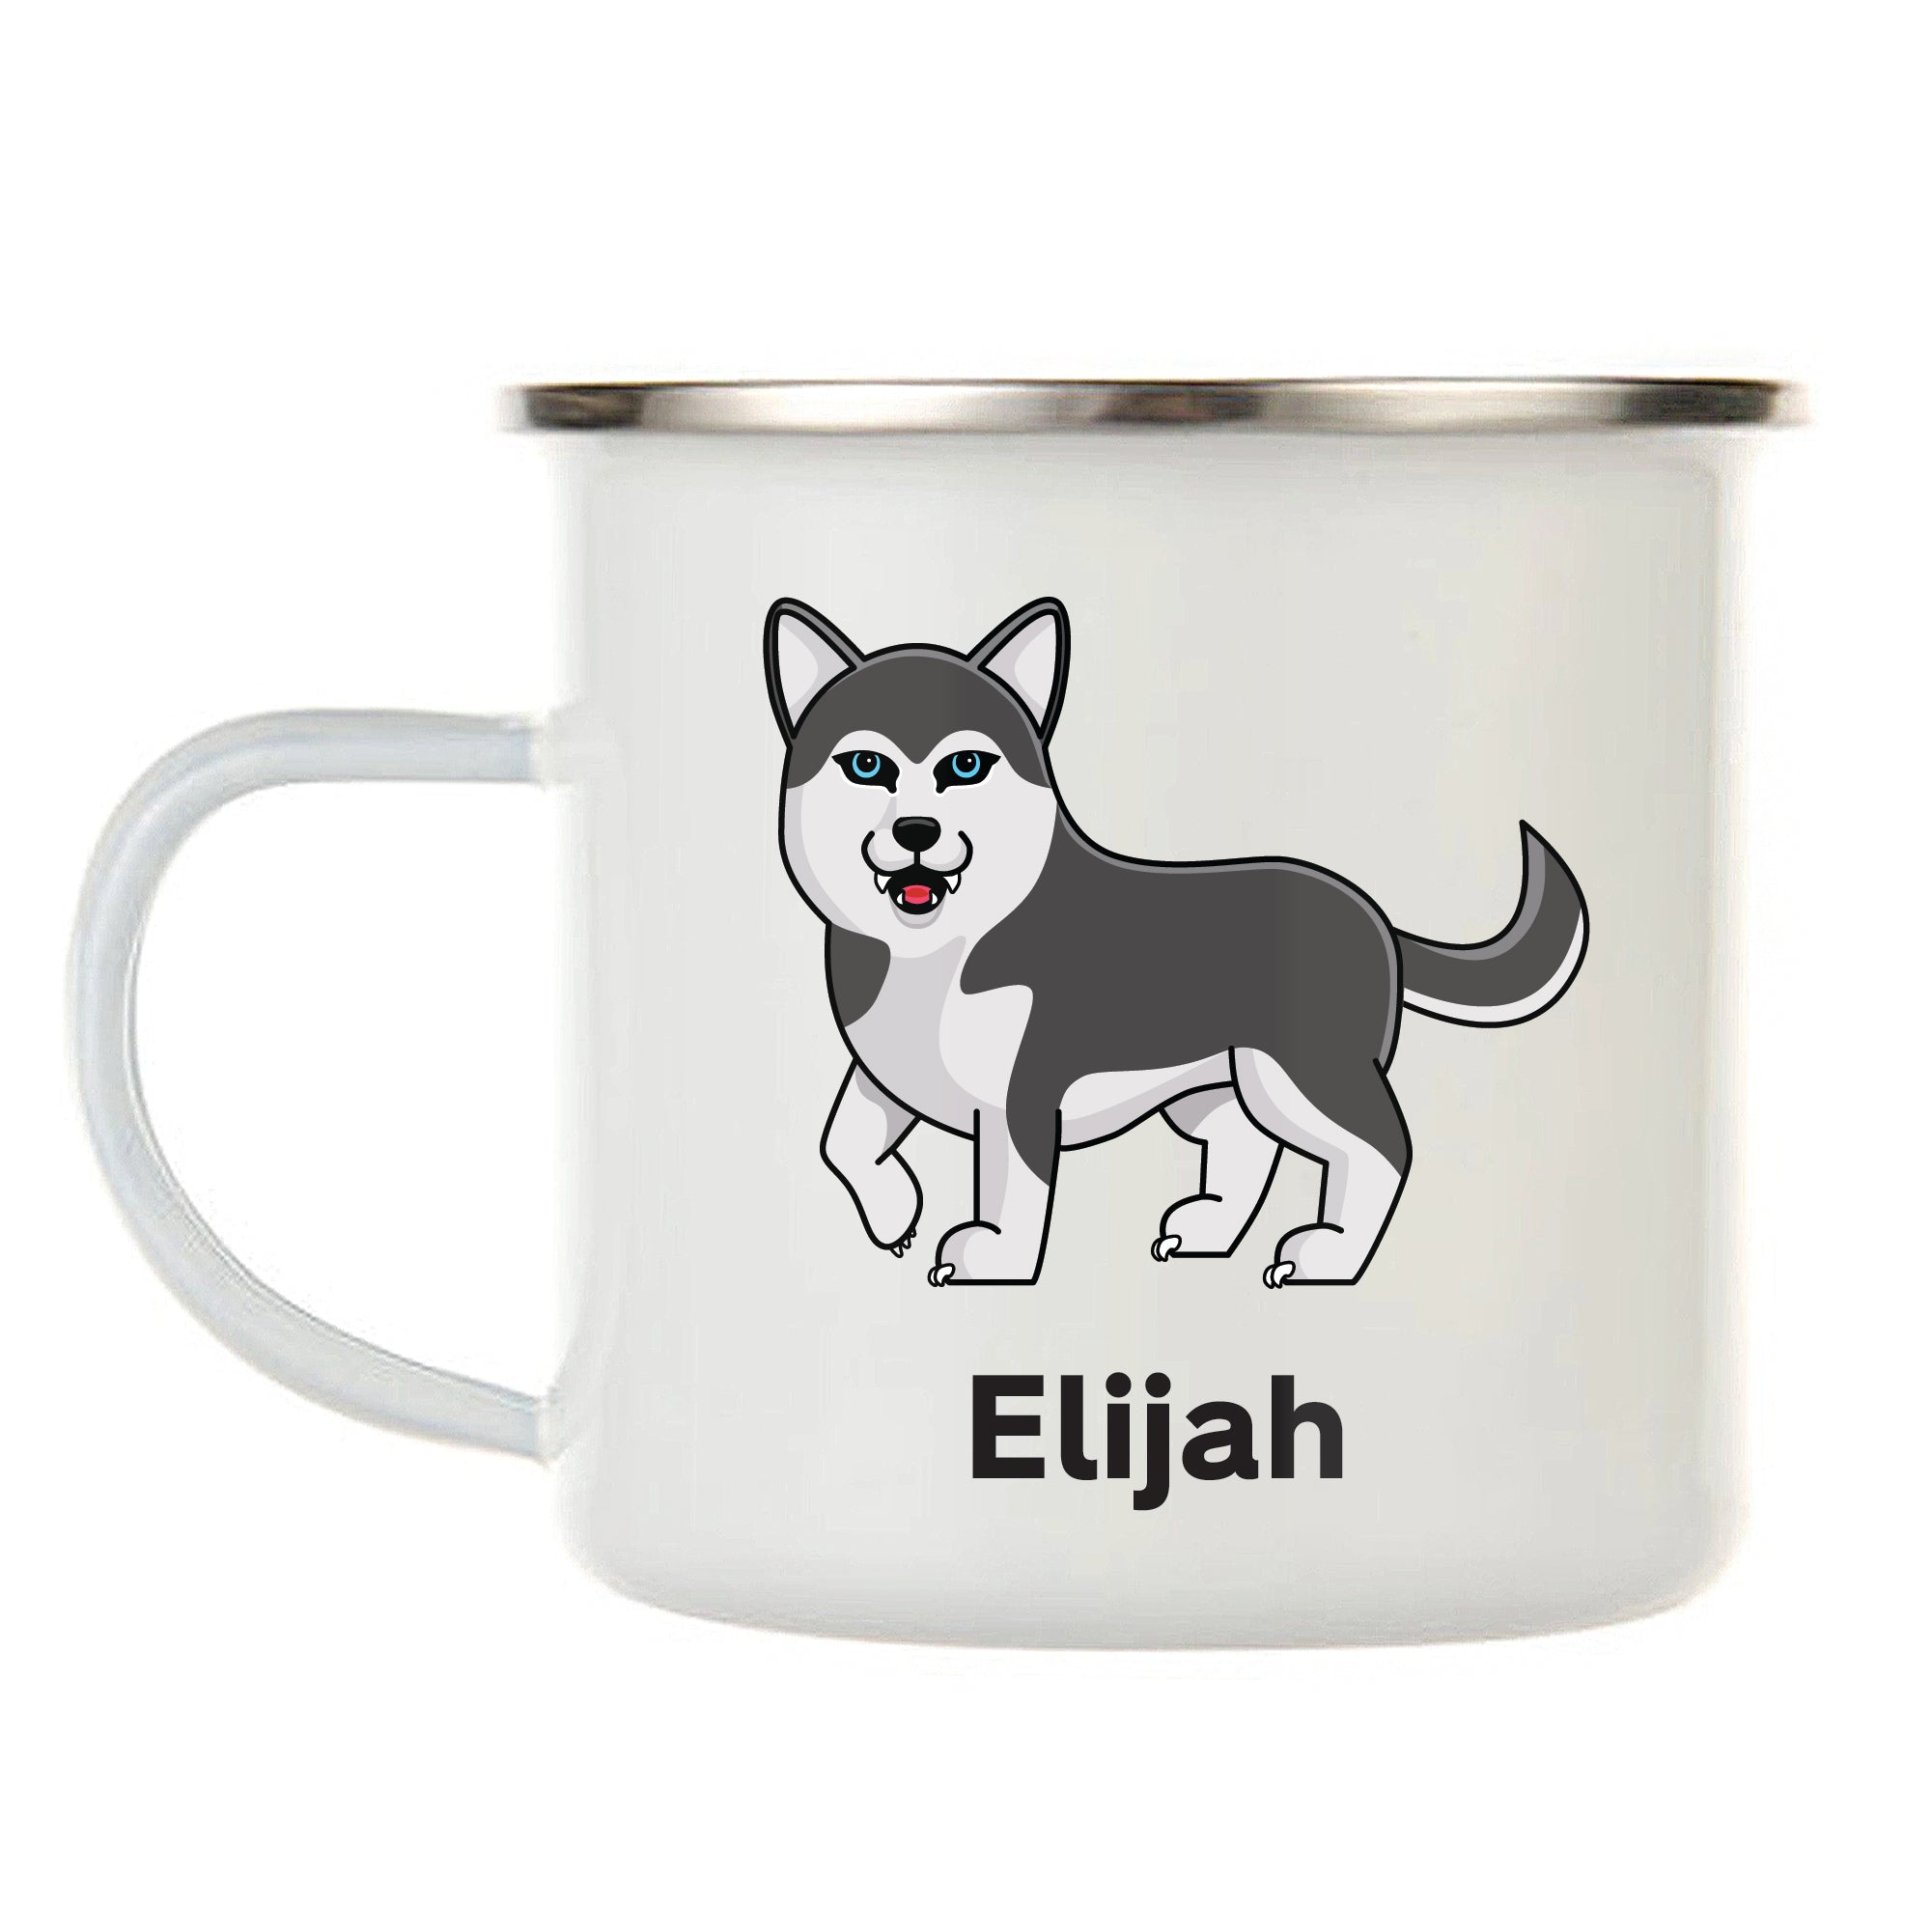 Kids Personalized 12 oz. Stainless Steel & Enamel Camp Mug with Electric Wolf